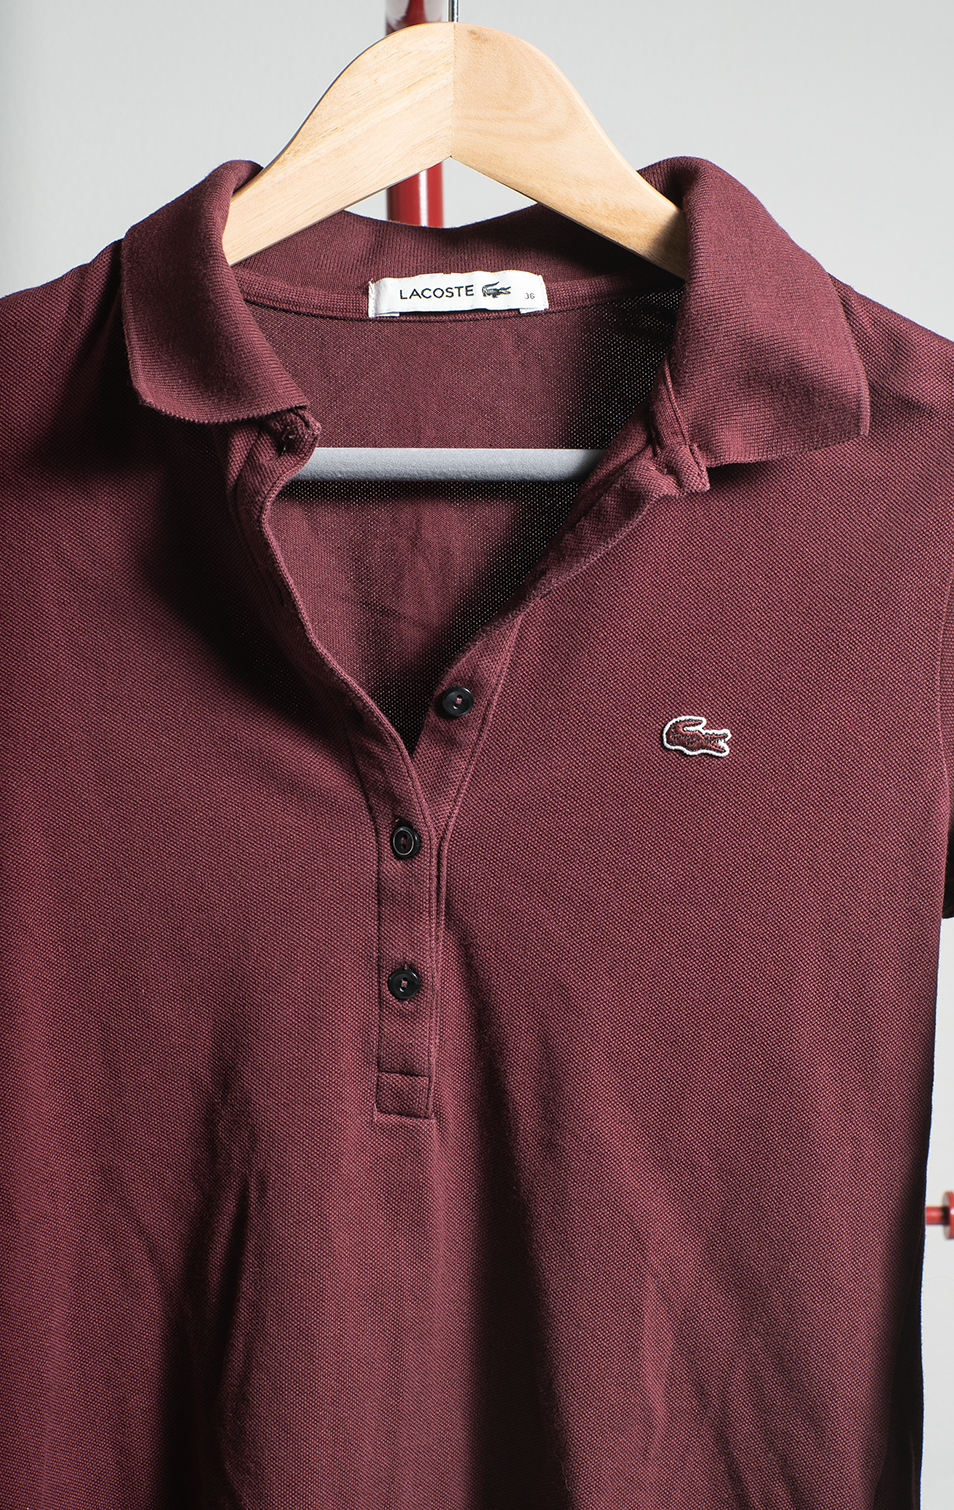 LACOSTE TOP - Burgundy - Small